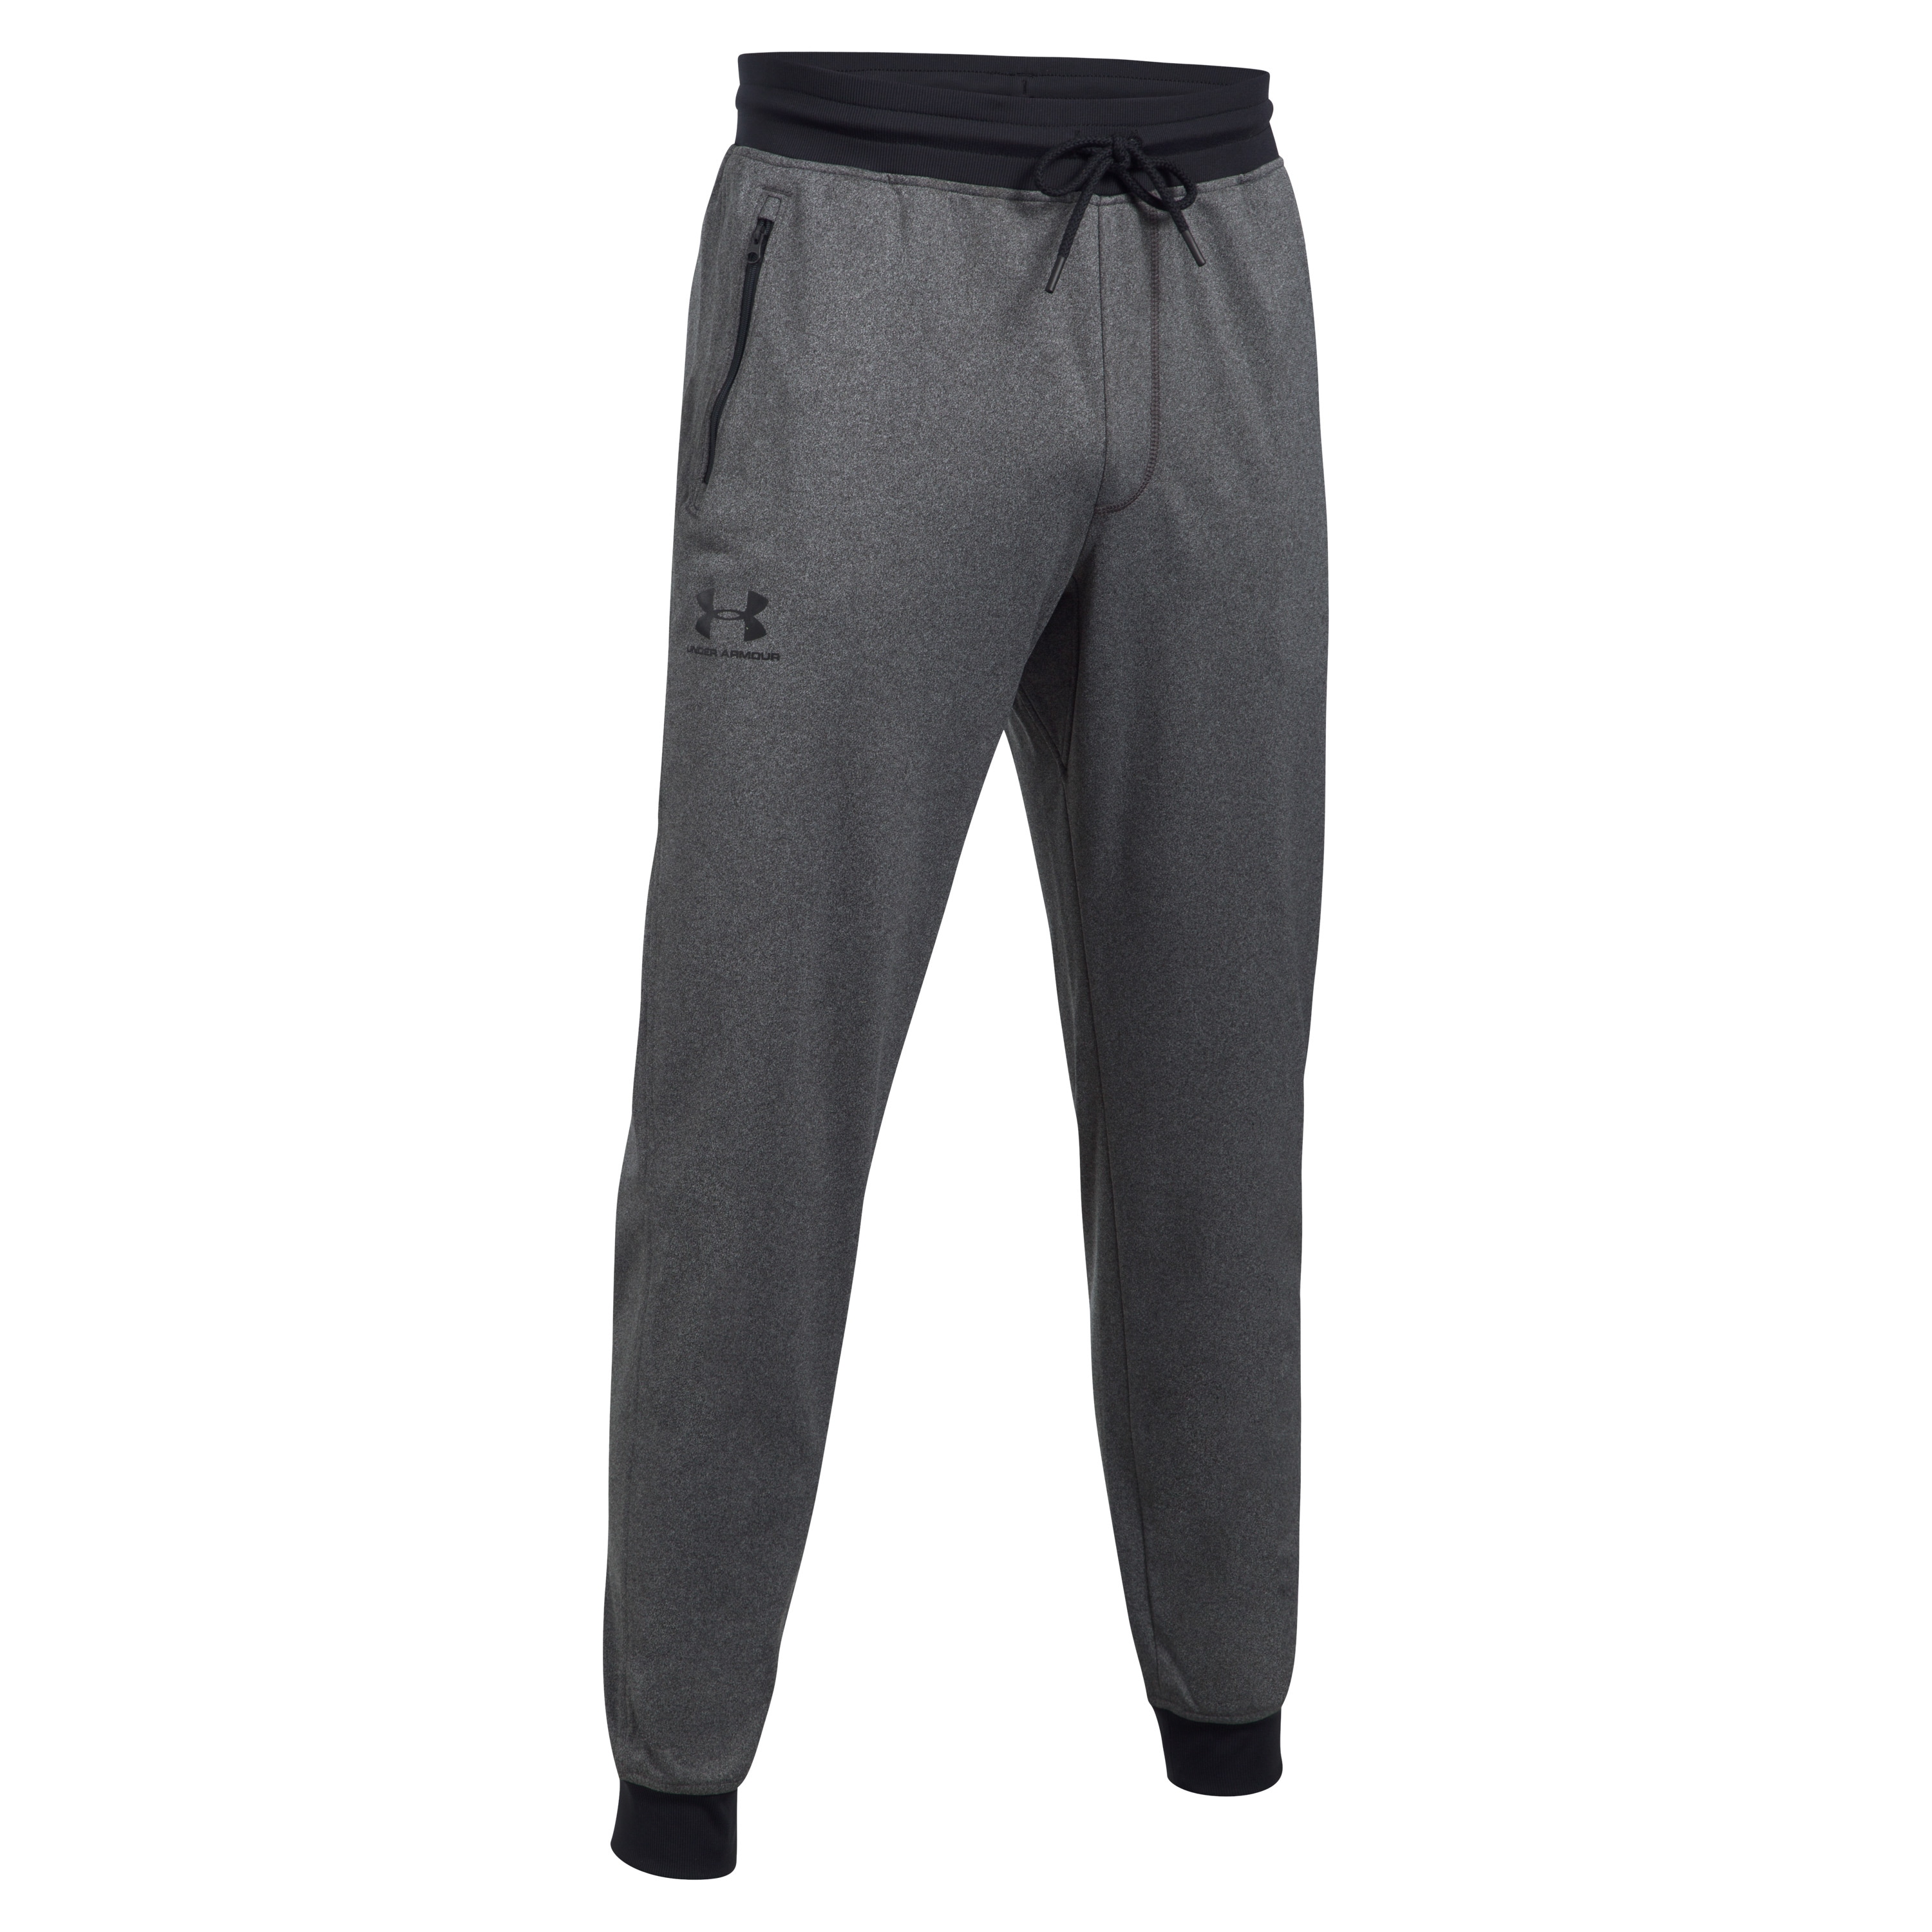 gray under armour joggers